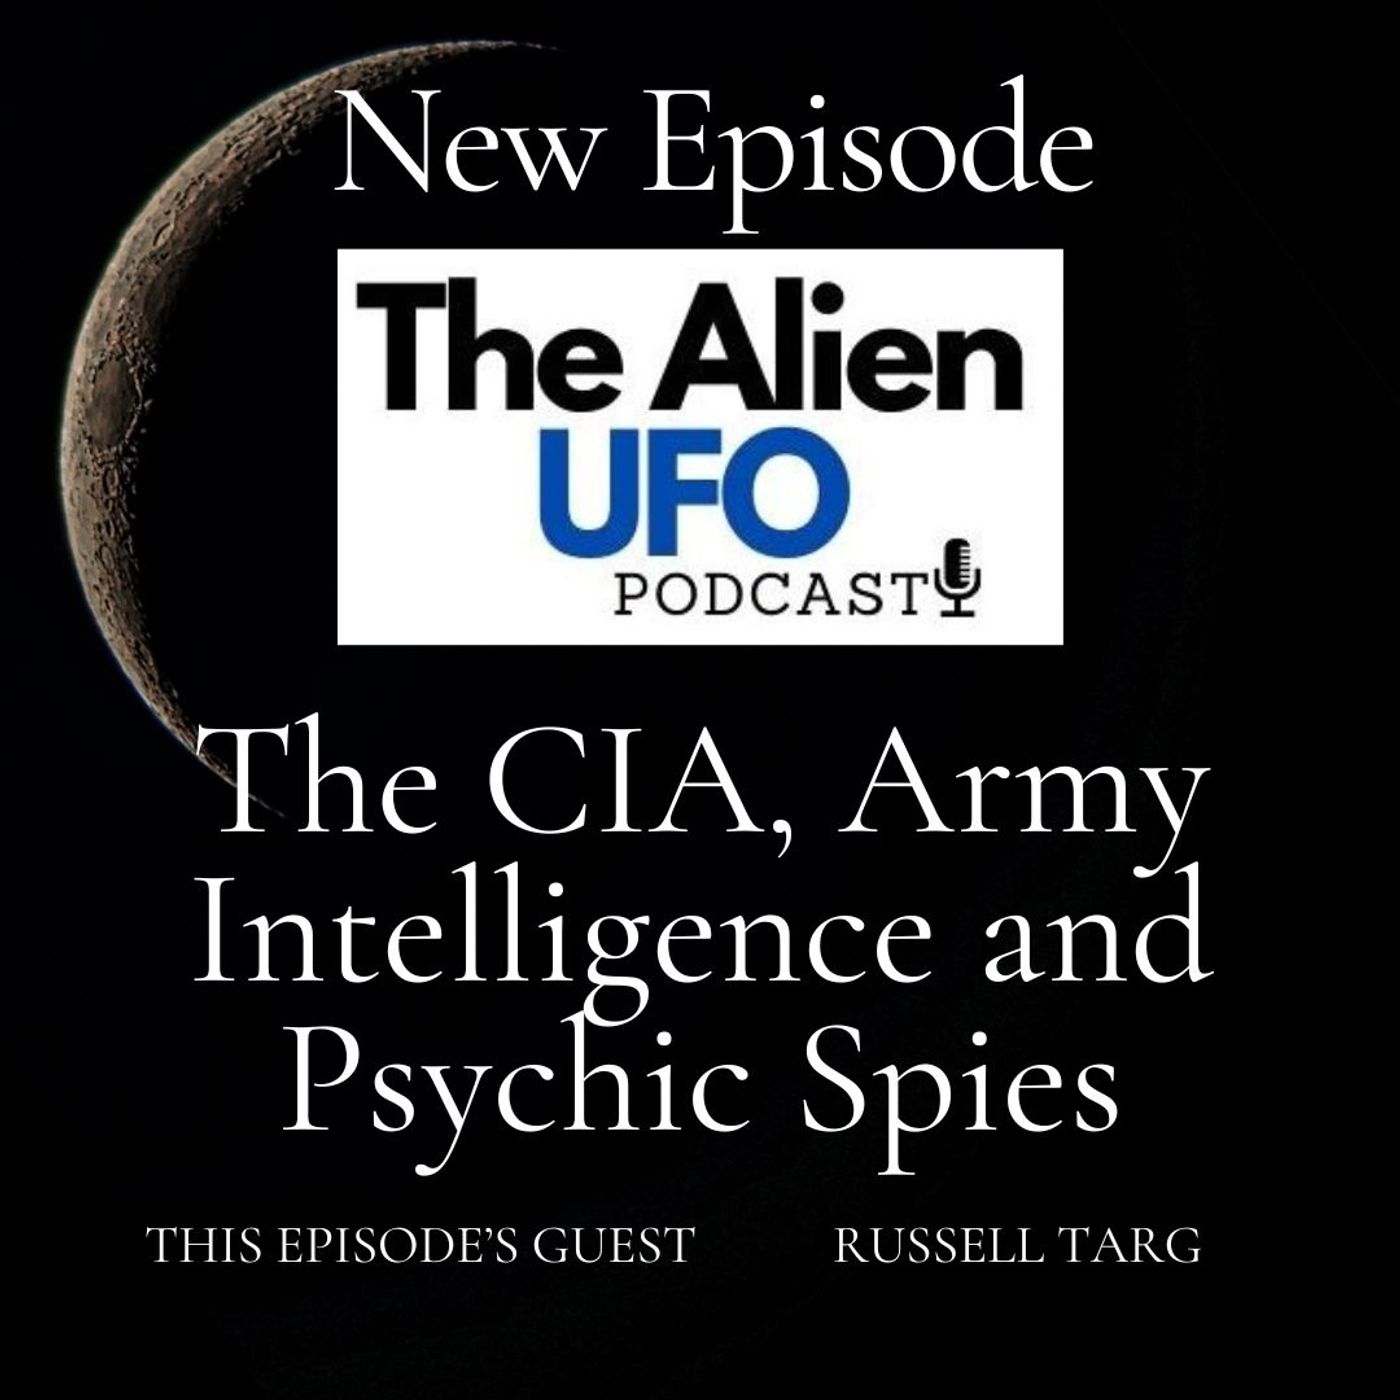 The CIA, Army Intelligence and Psychic Spies